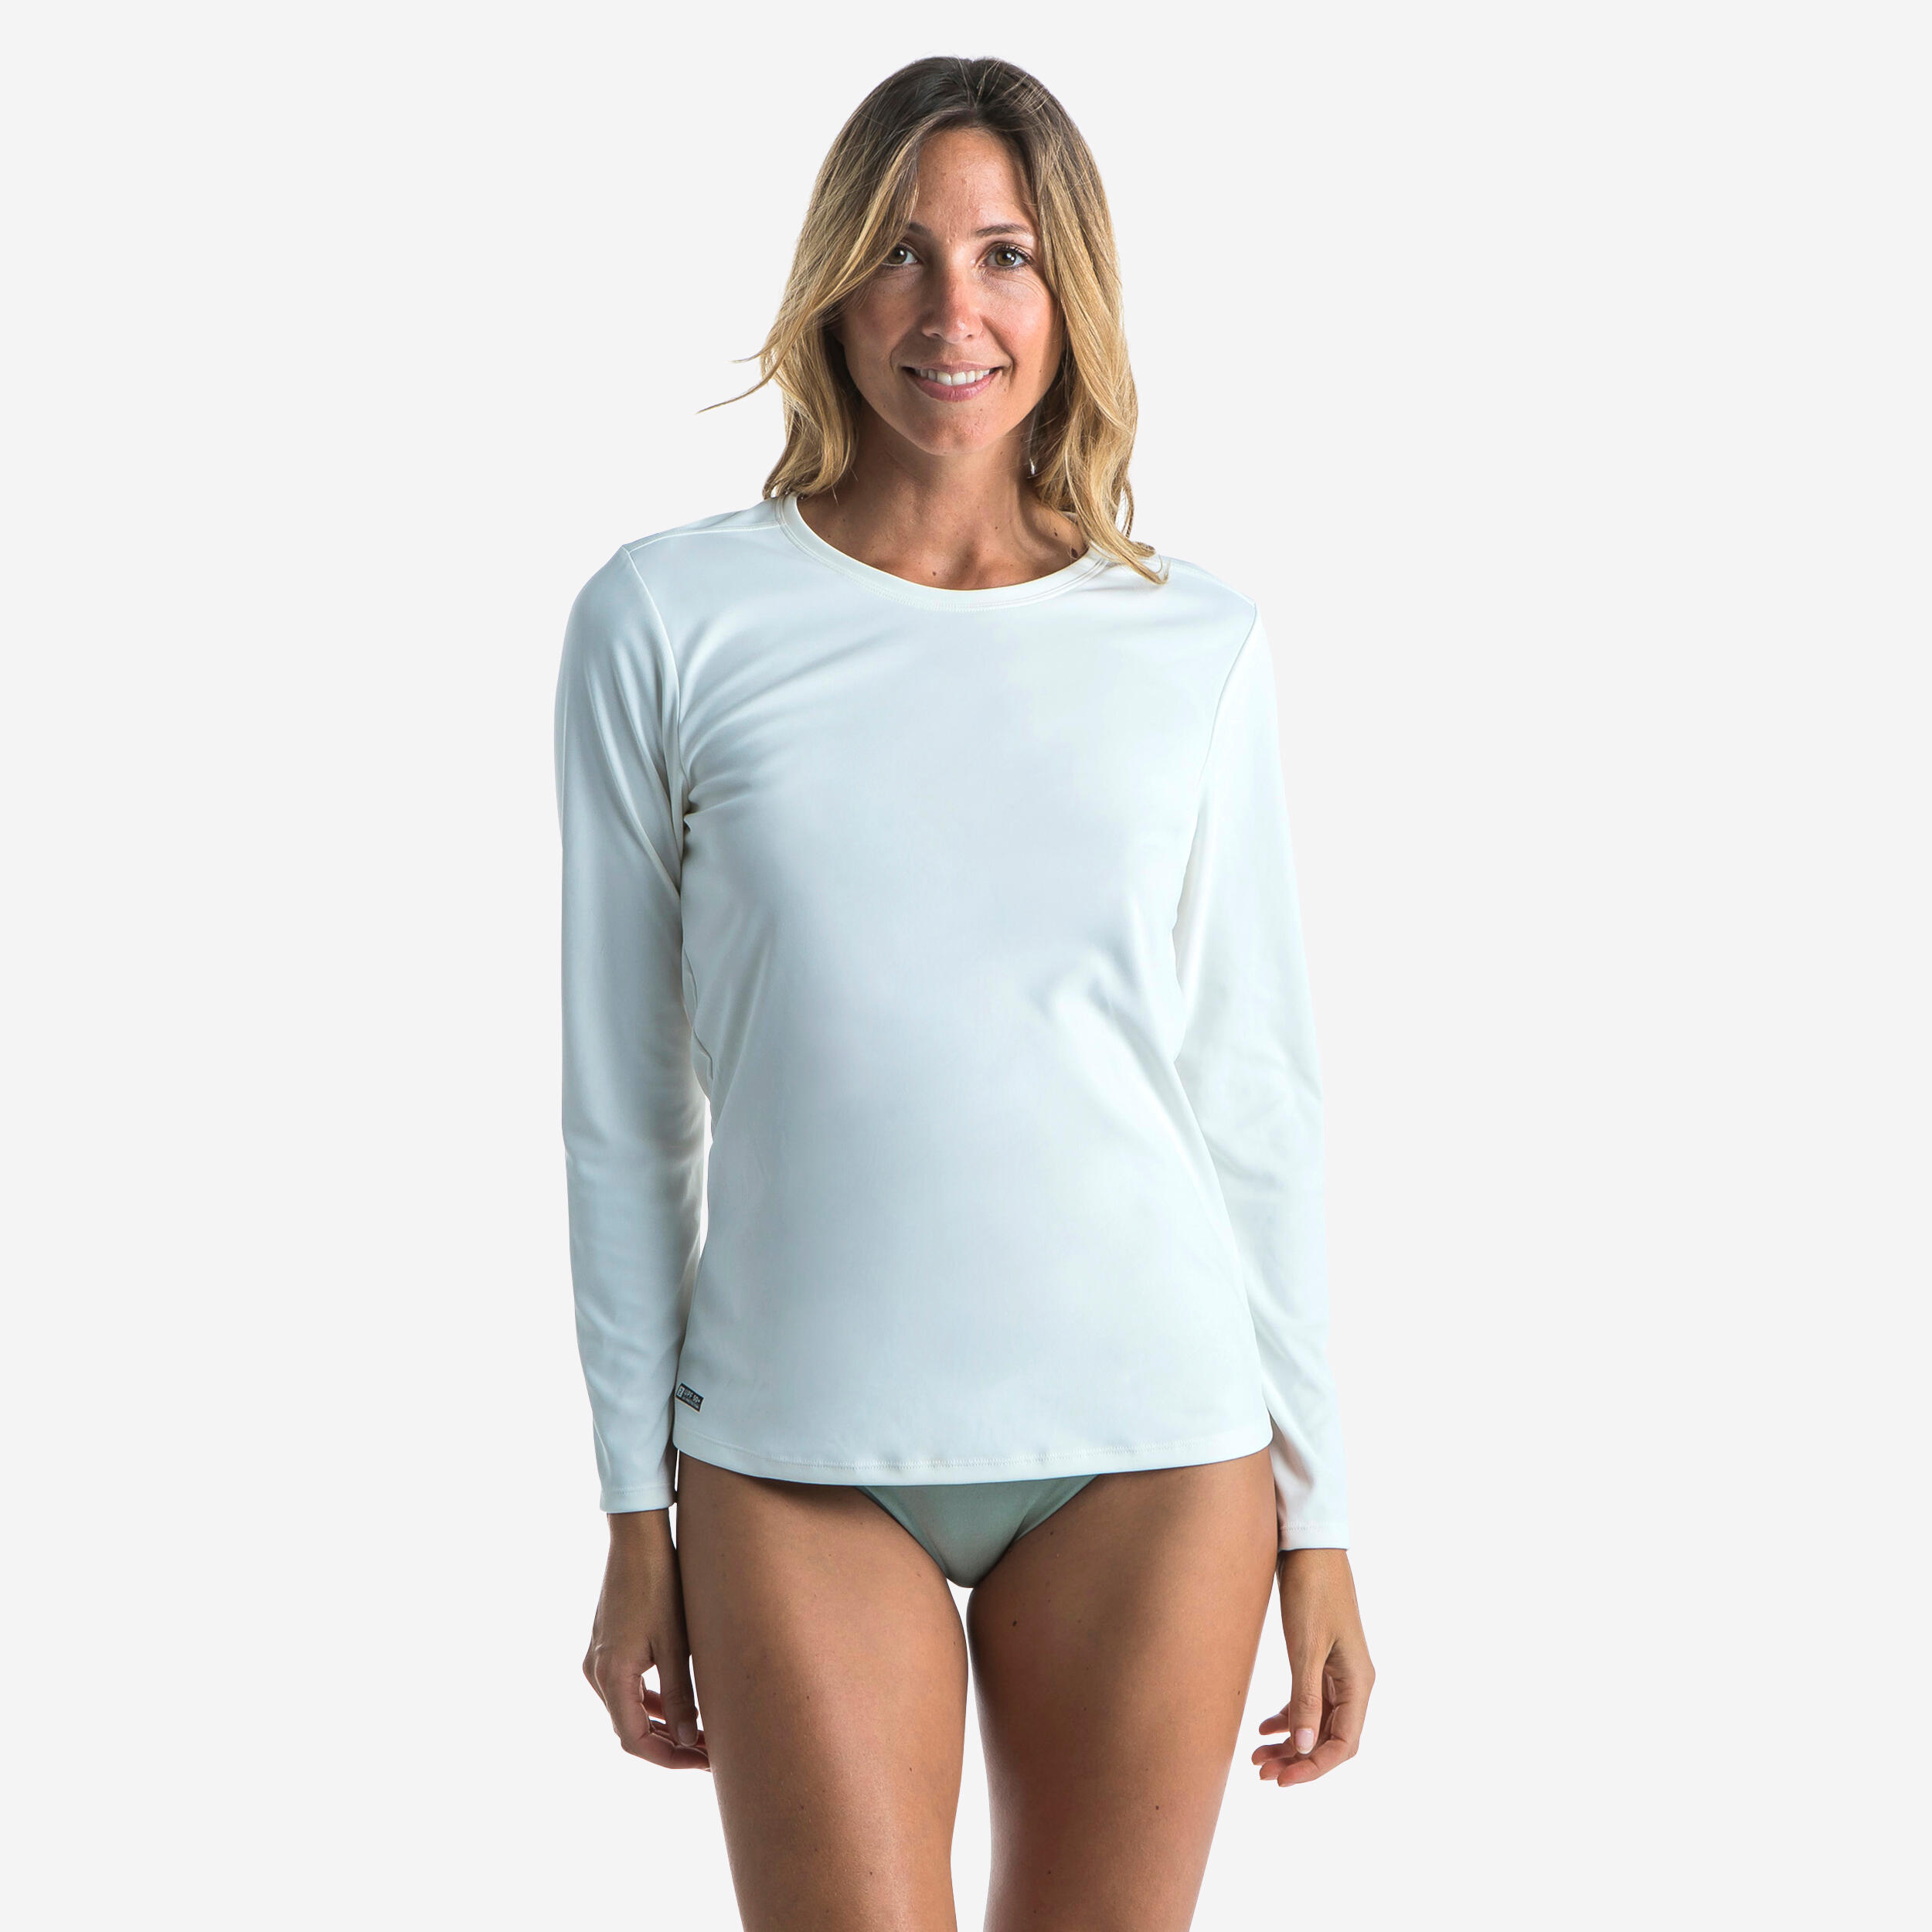 OLAIAN WOMEN’S SURFING LONG-SLEEVED UV-RESISTANT T-SHIRT MALOU GREIGE (UNDYED)